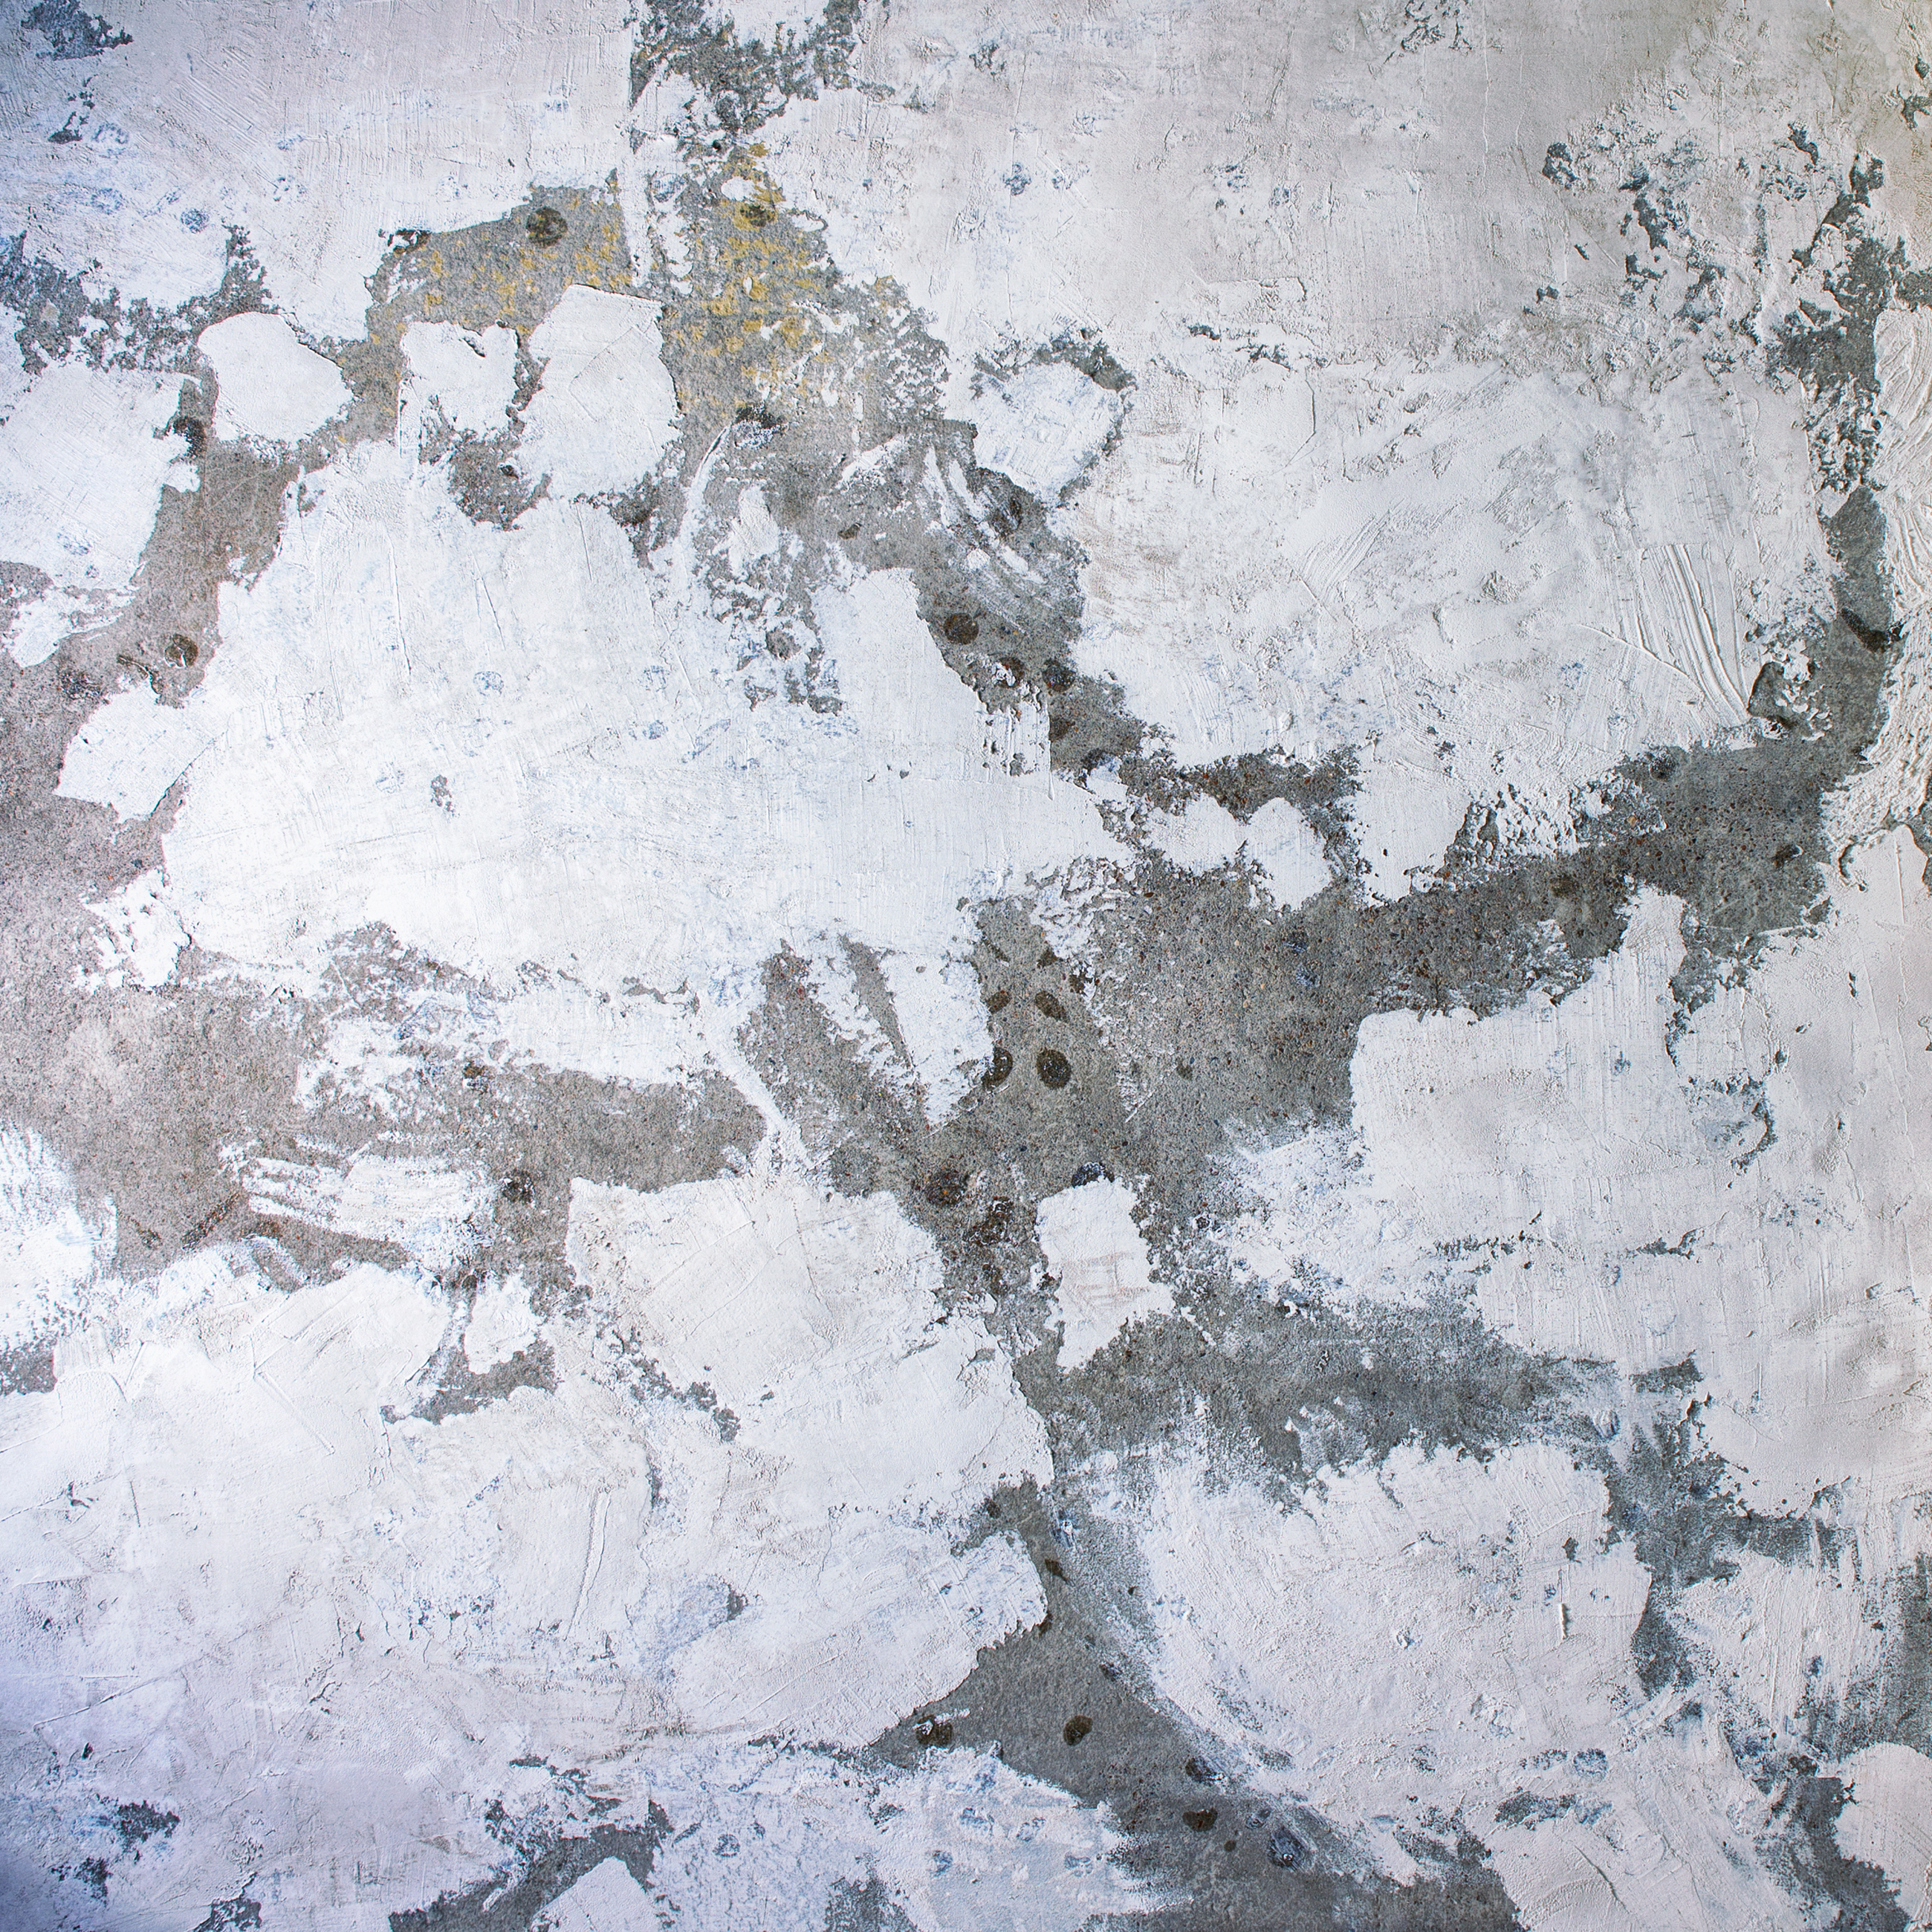 Grunge ceiling, Abandoned, Grey, Weathered, Wall, HQ Photo